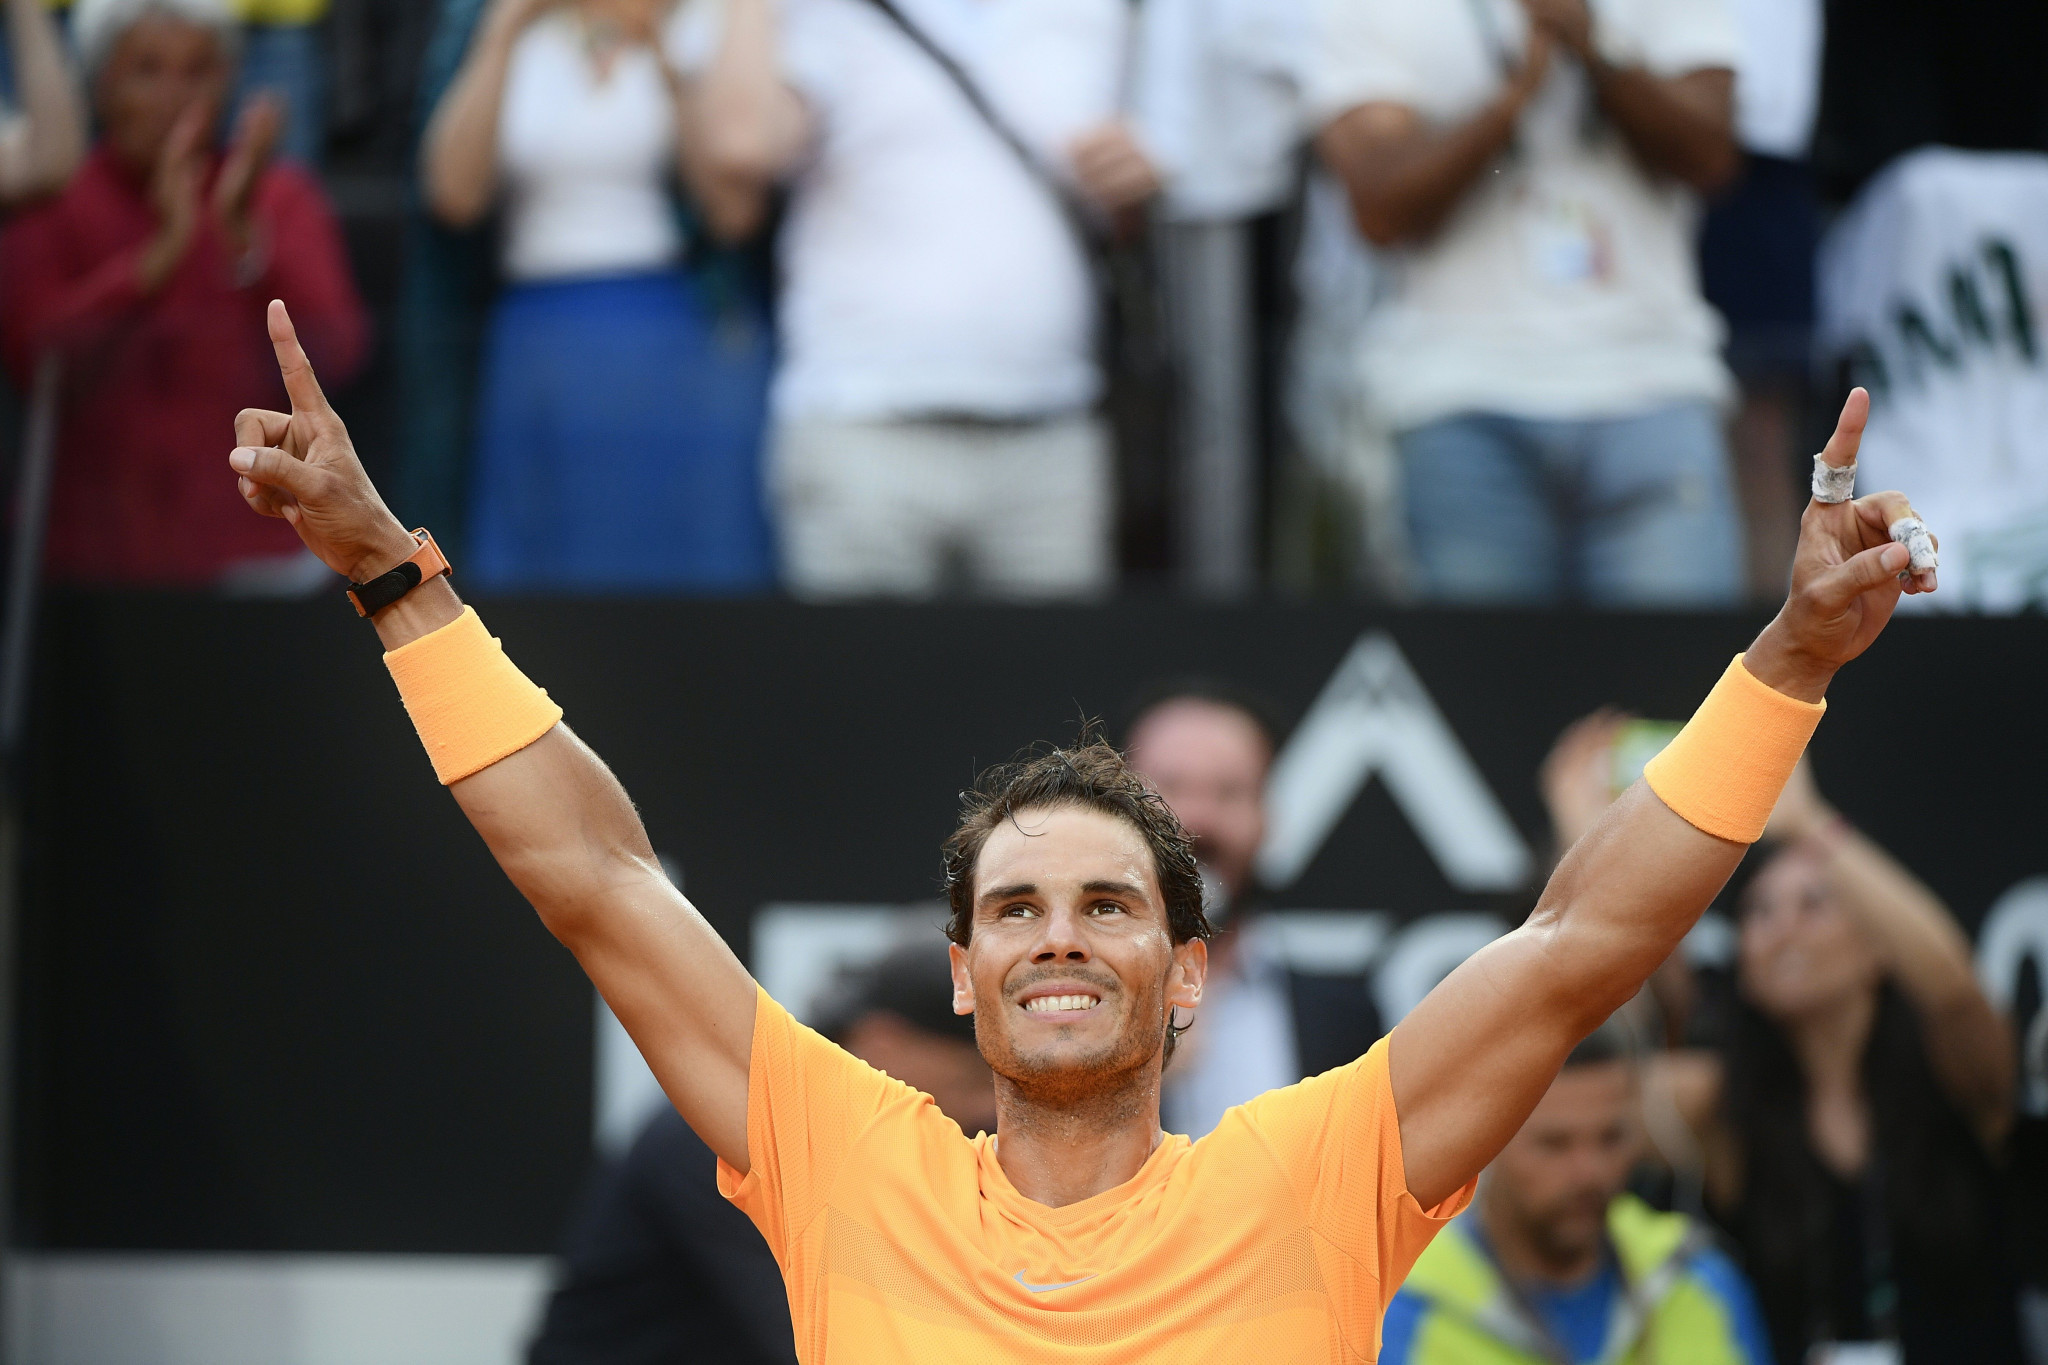 Grand Slam records could fall at 2021 Australian Open as Nadal and Williams eye glory